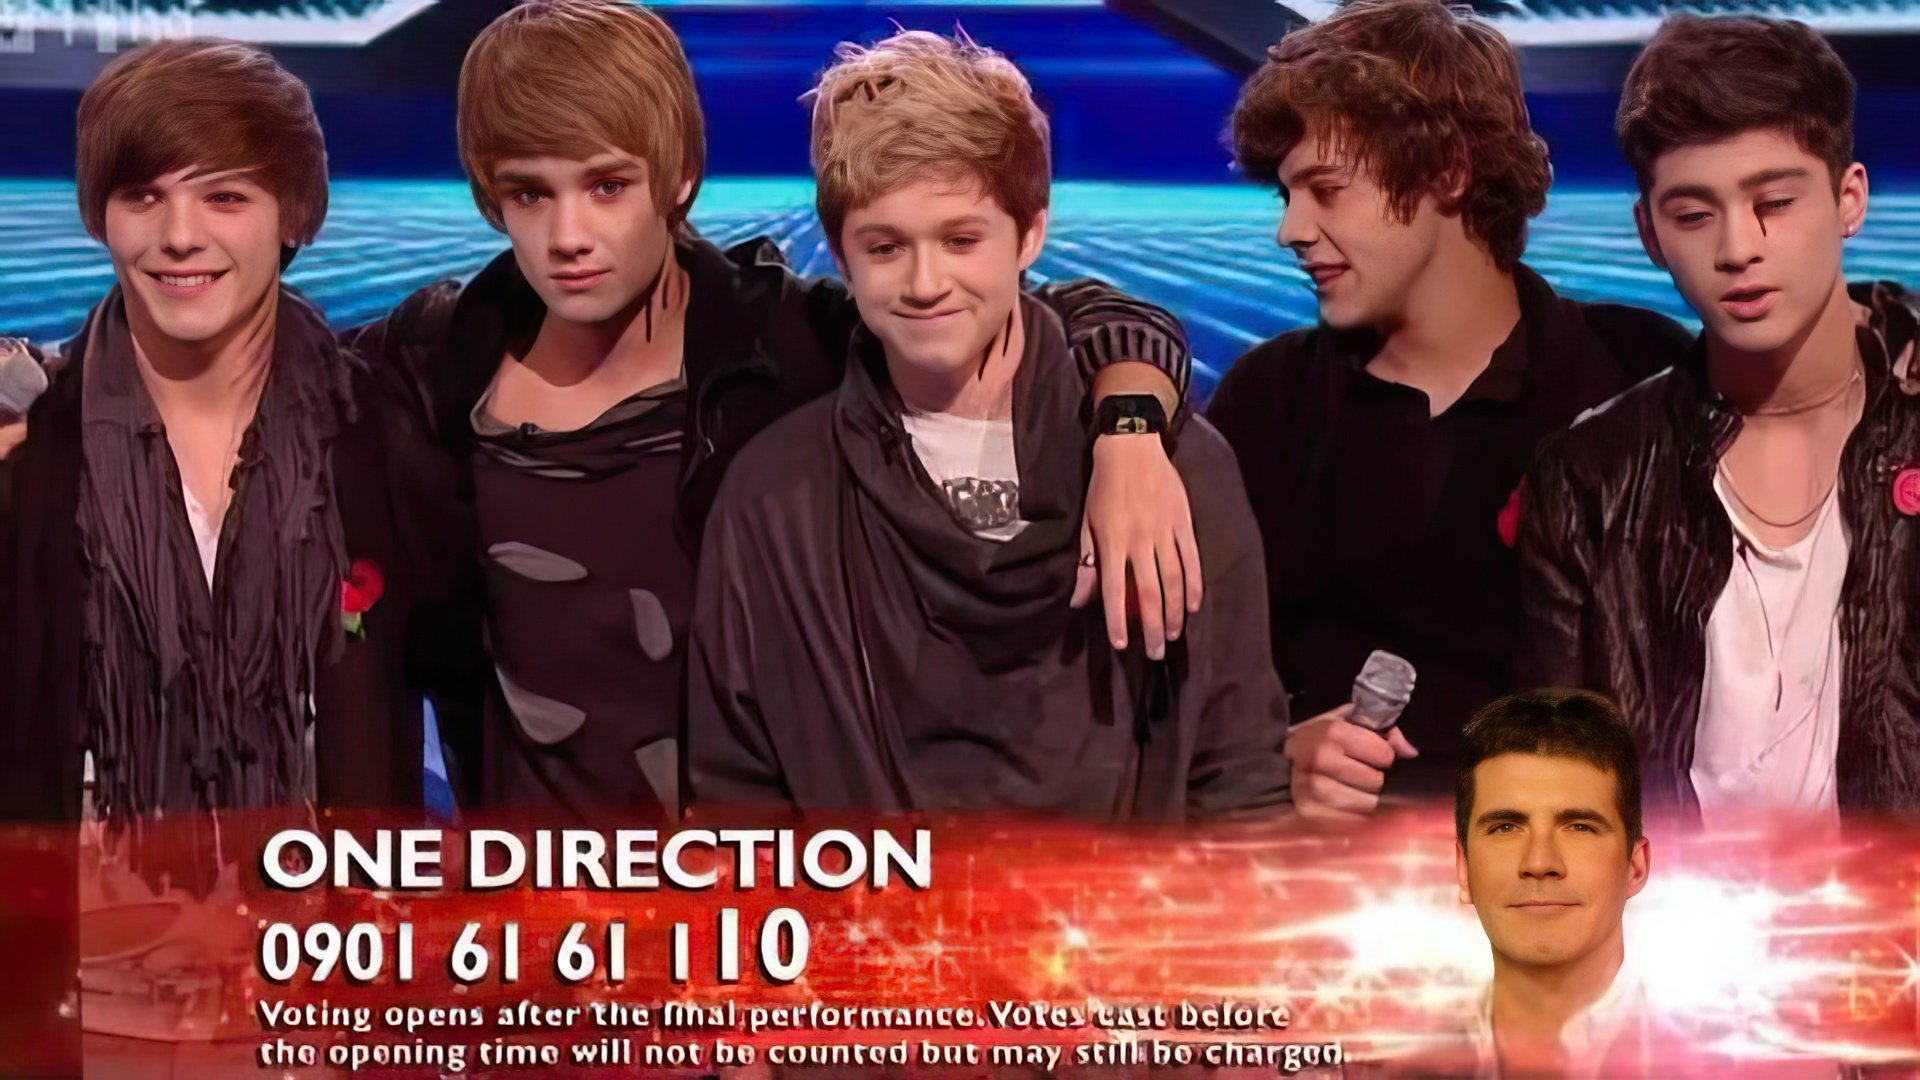 The band One Direction was formed in 2010 on the X-Factor show